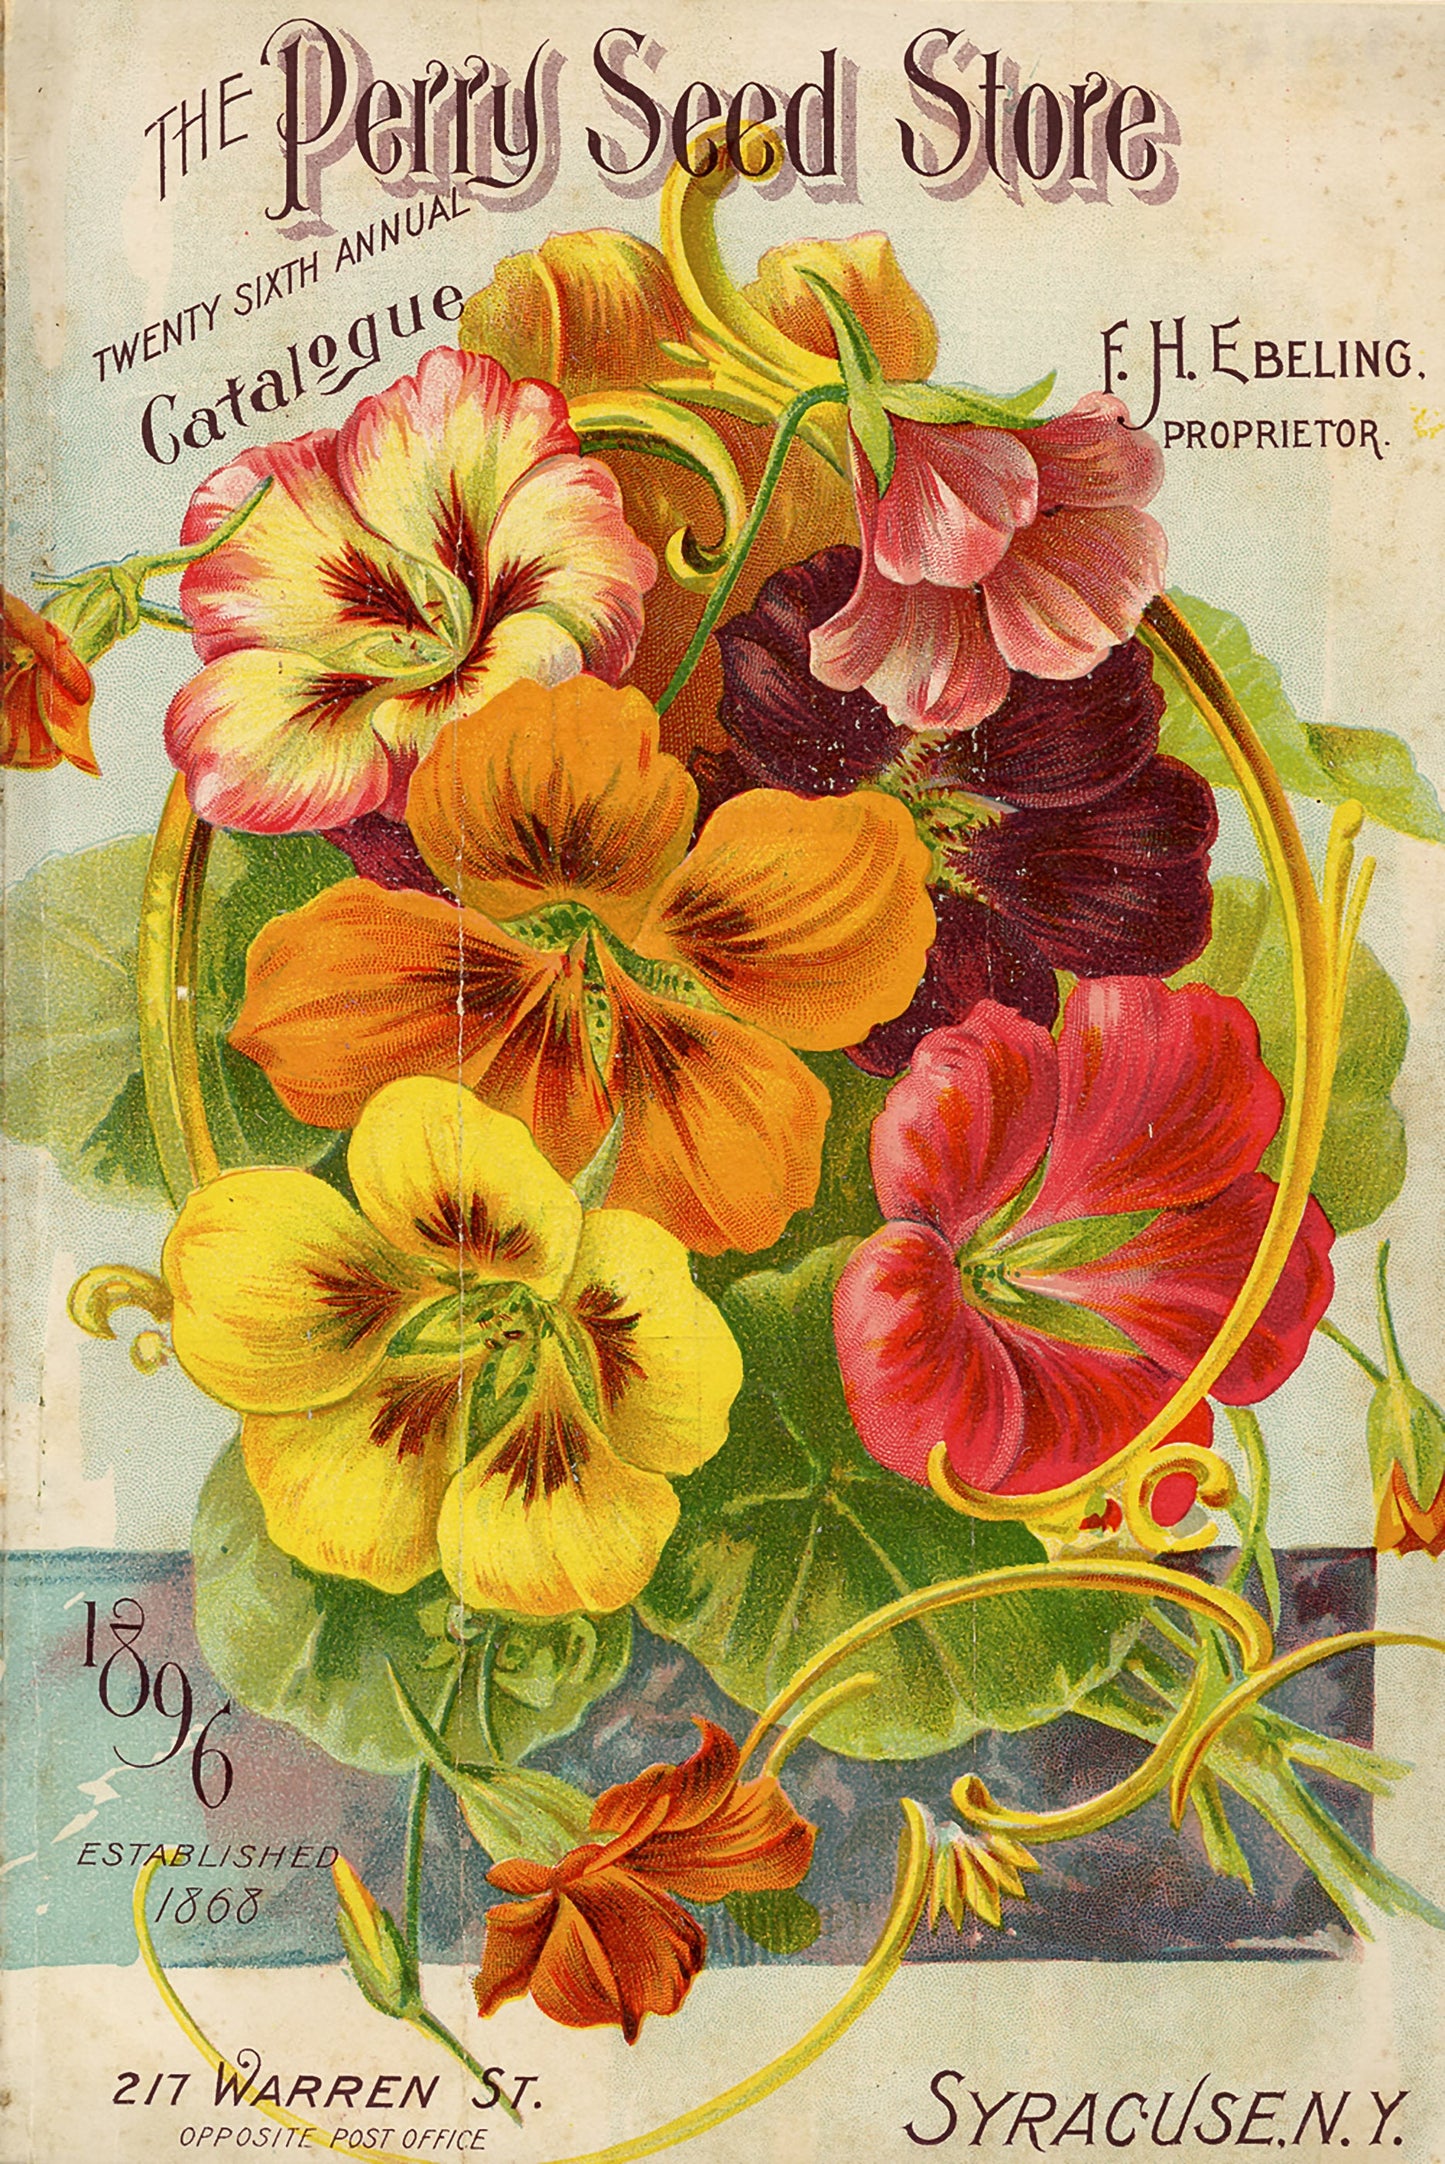 Vintage Seed Catalogue Covers Set 2 [72 Images]